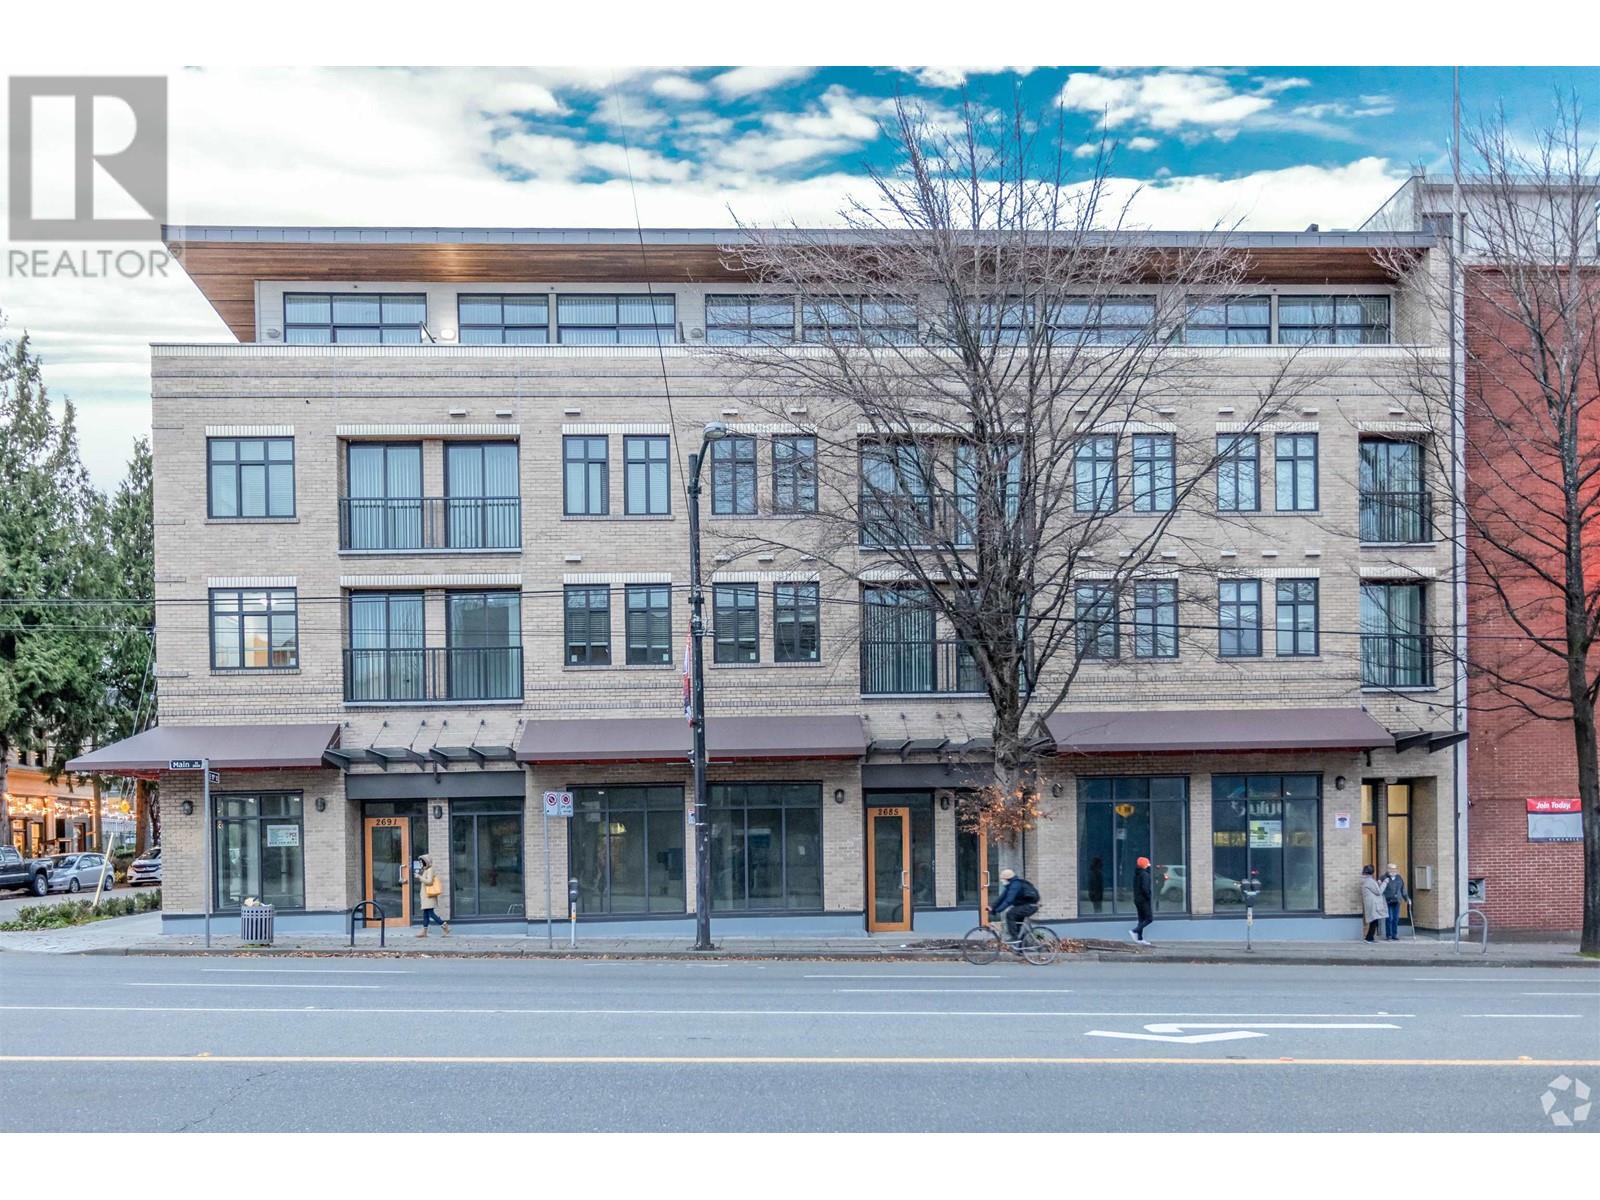 2685 MAIN STREET located in Vancouver, British Columbia